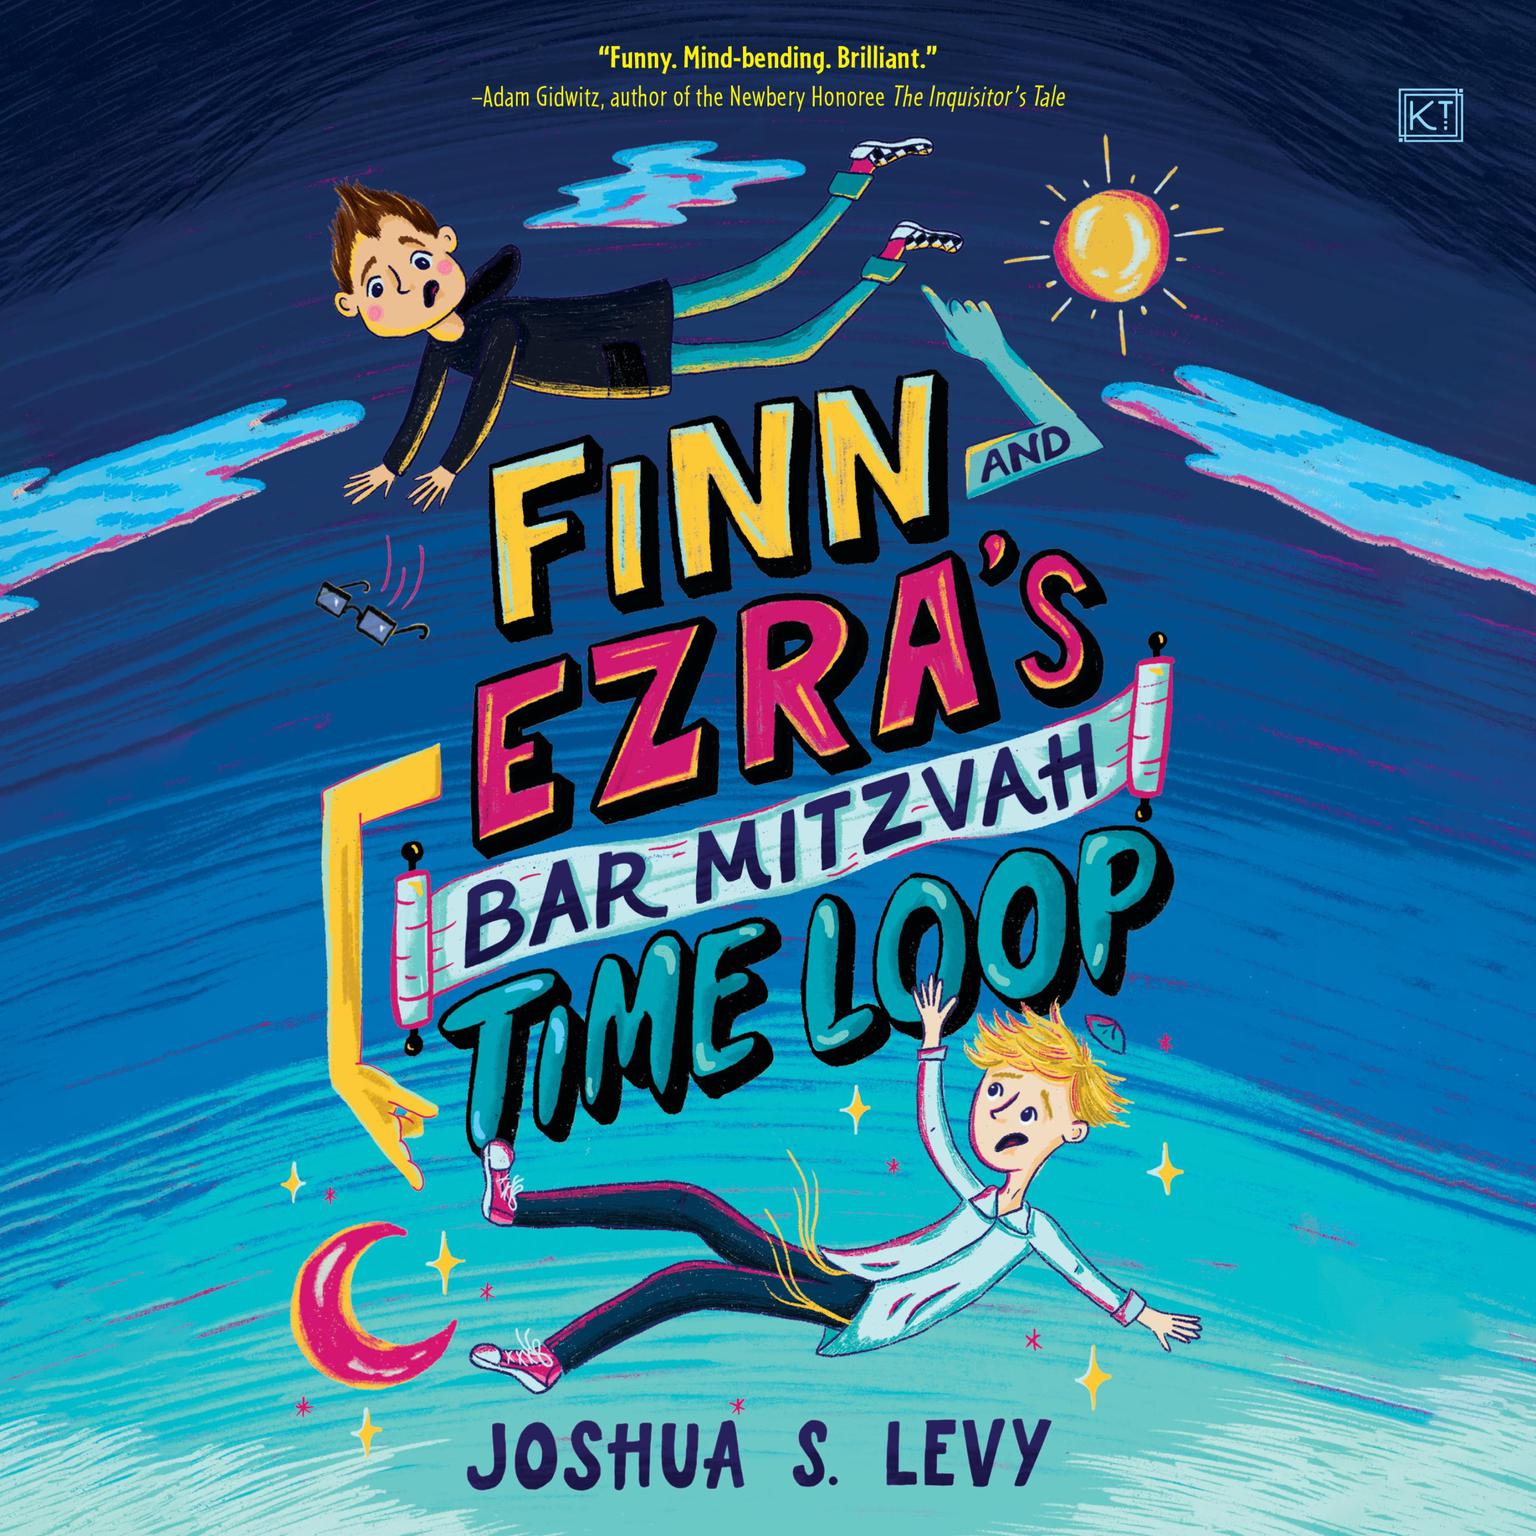 Finn and Ezras Bar Mitzvah Time Loop Audiobook, by Joshua S. Levy